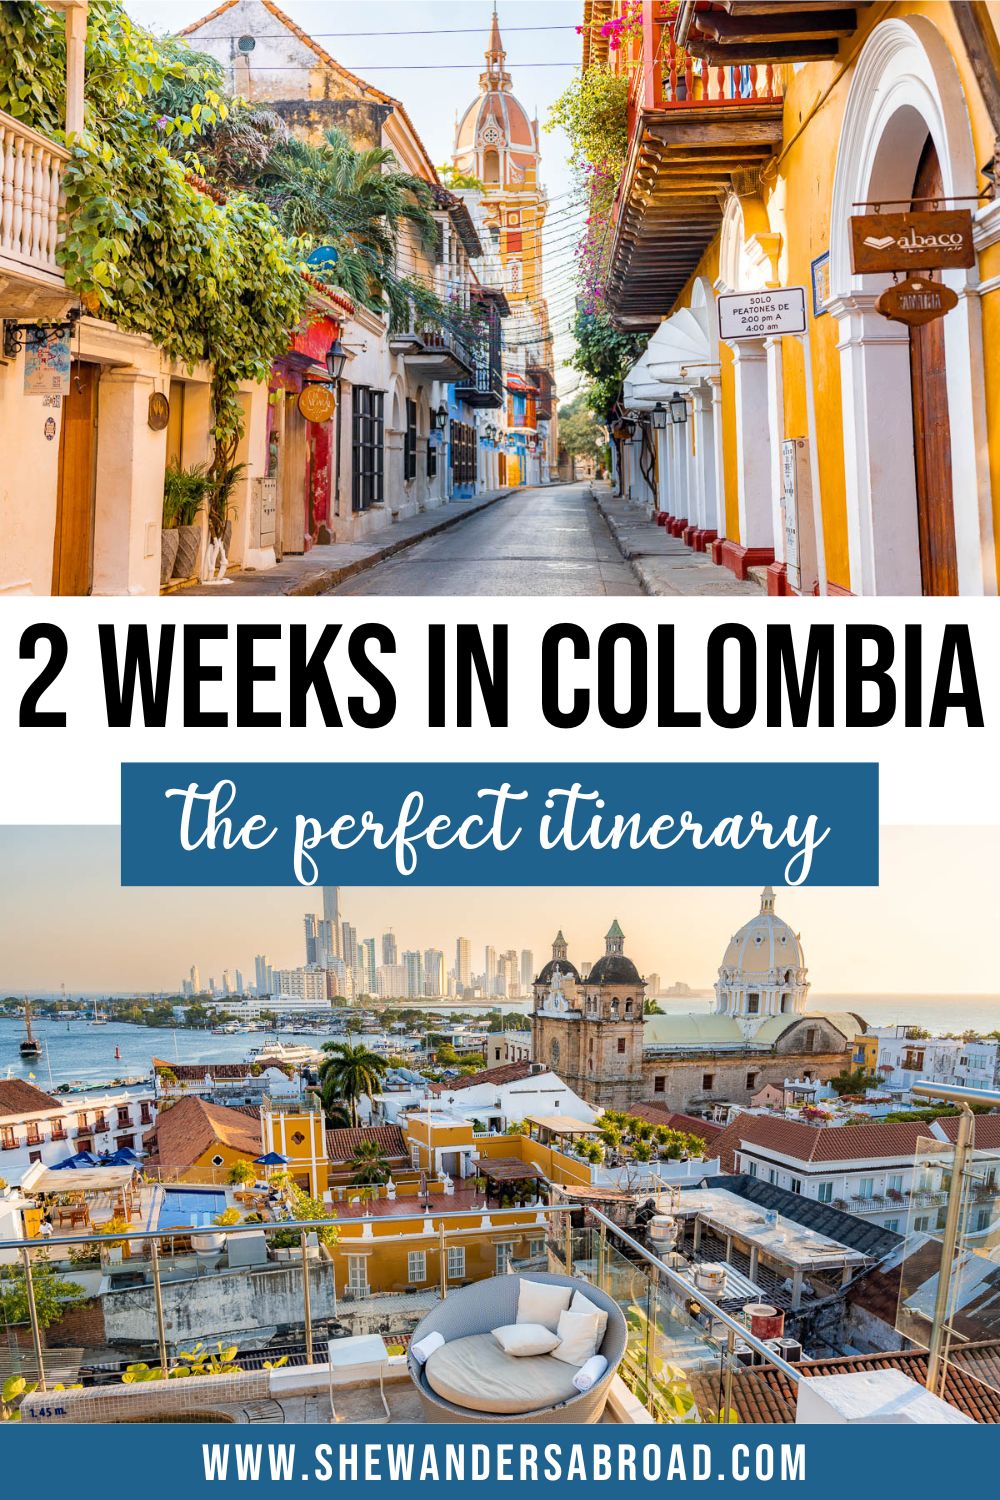 The Ultimate 2 Weeks in Colombia Itinerary